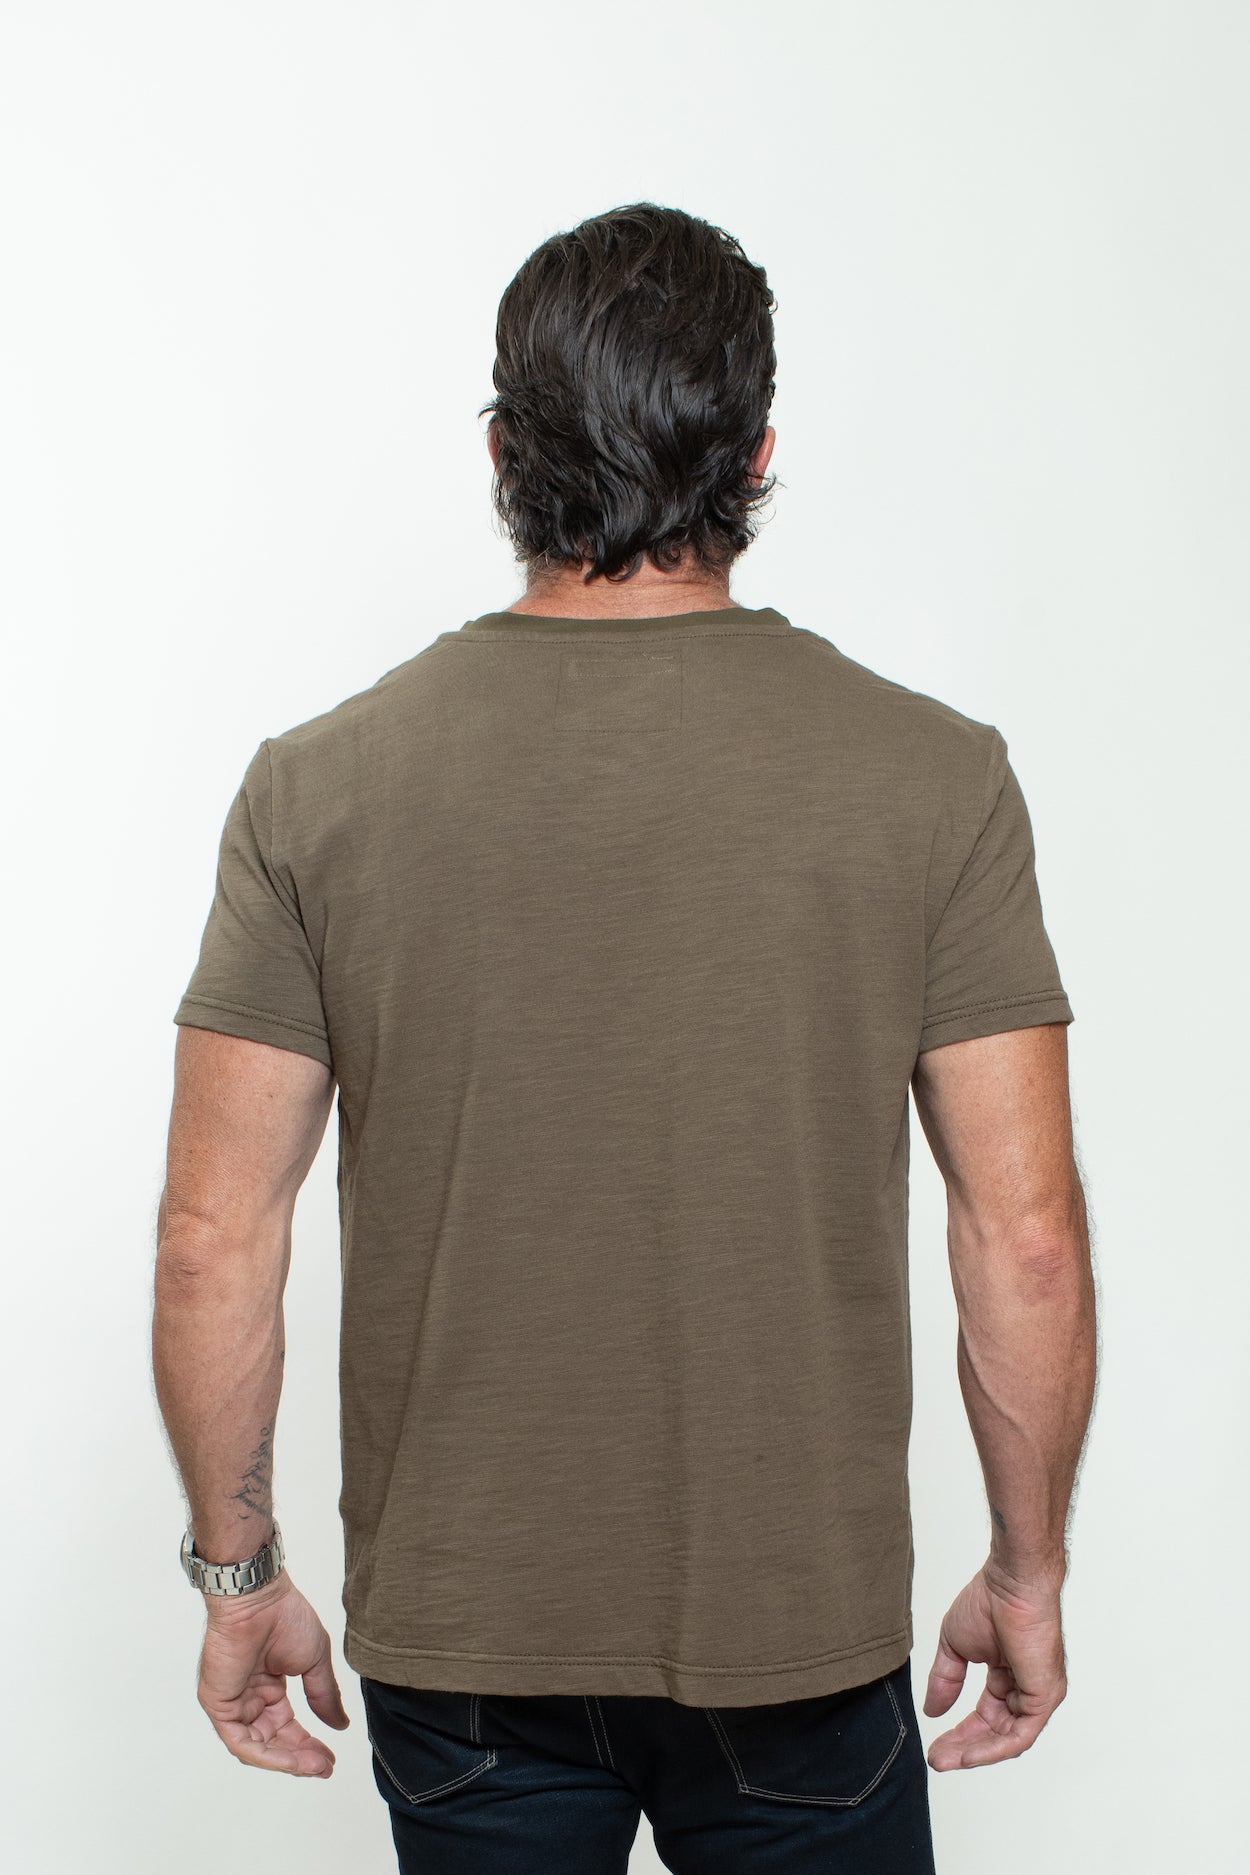 KNITTED SHORT SLEEVES T-SHIRT IN MILITARY GREEN